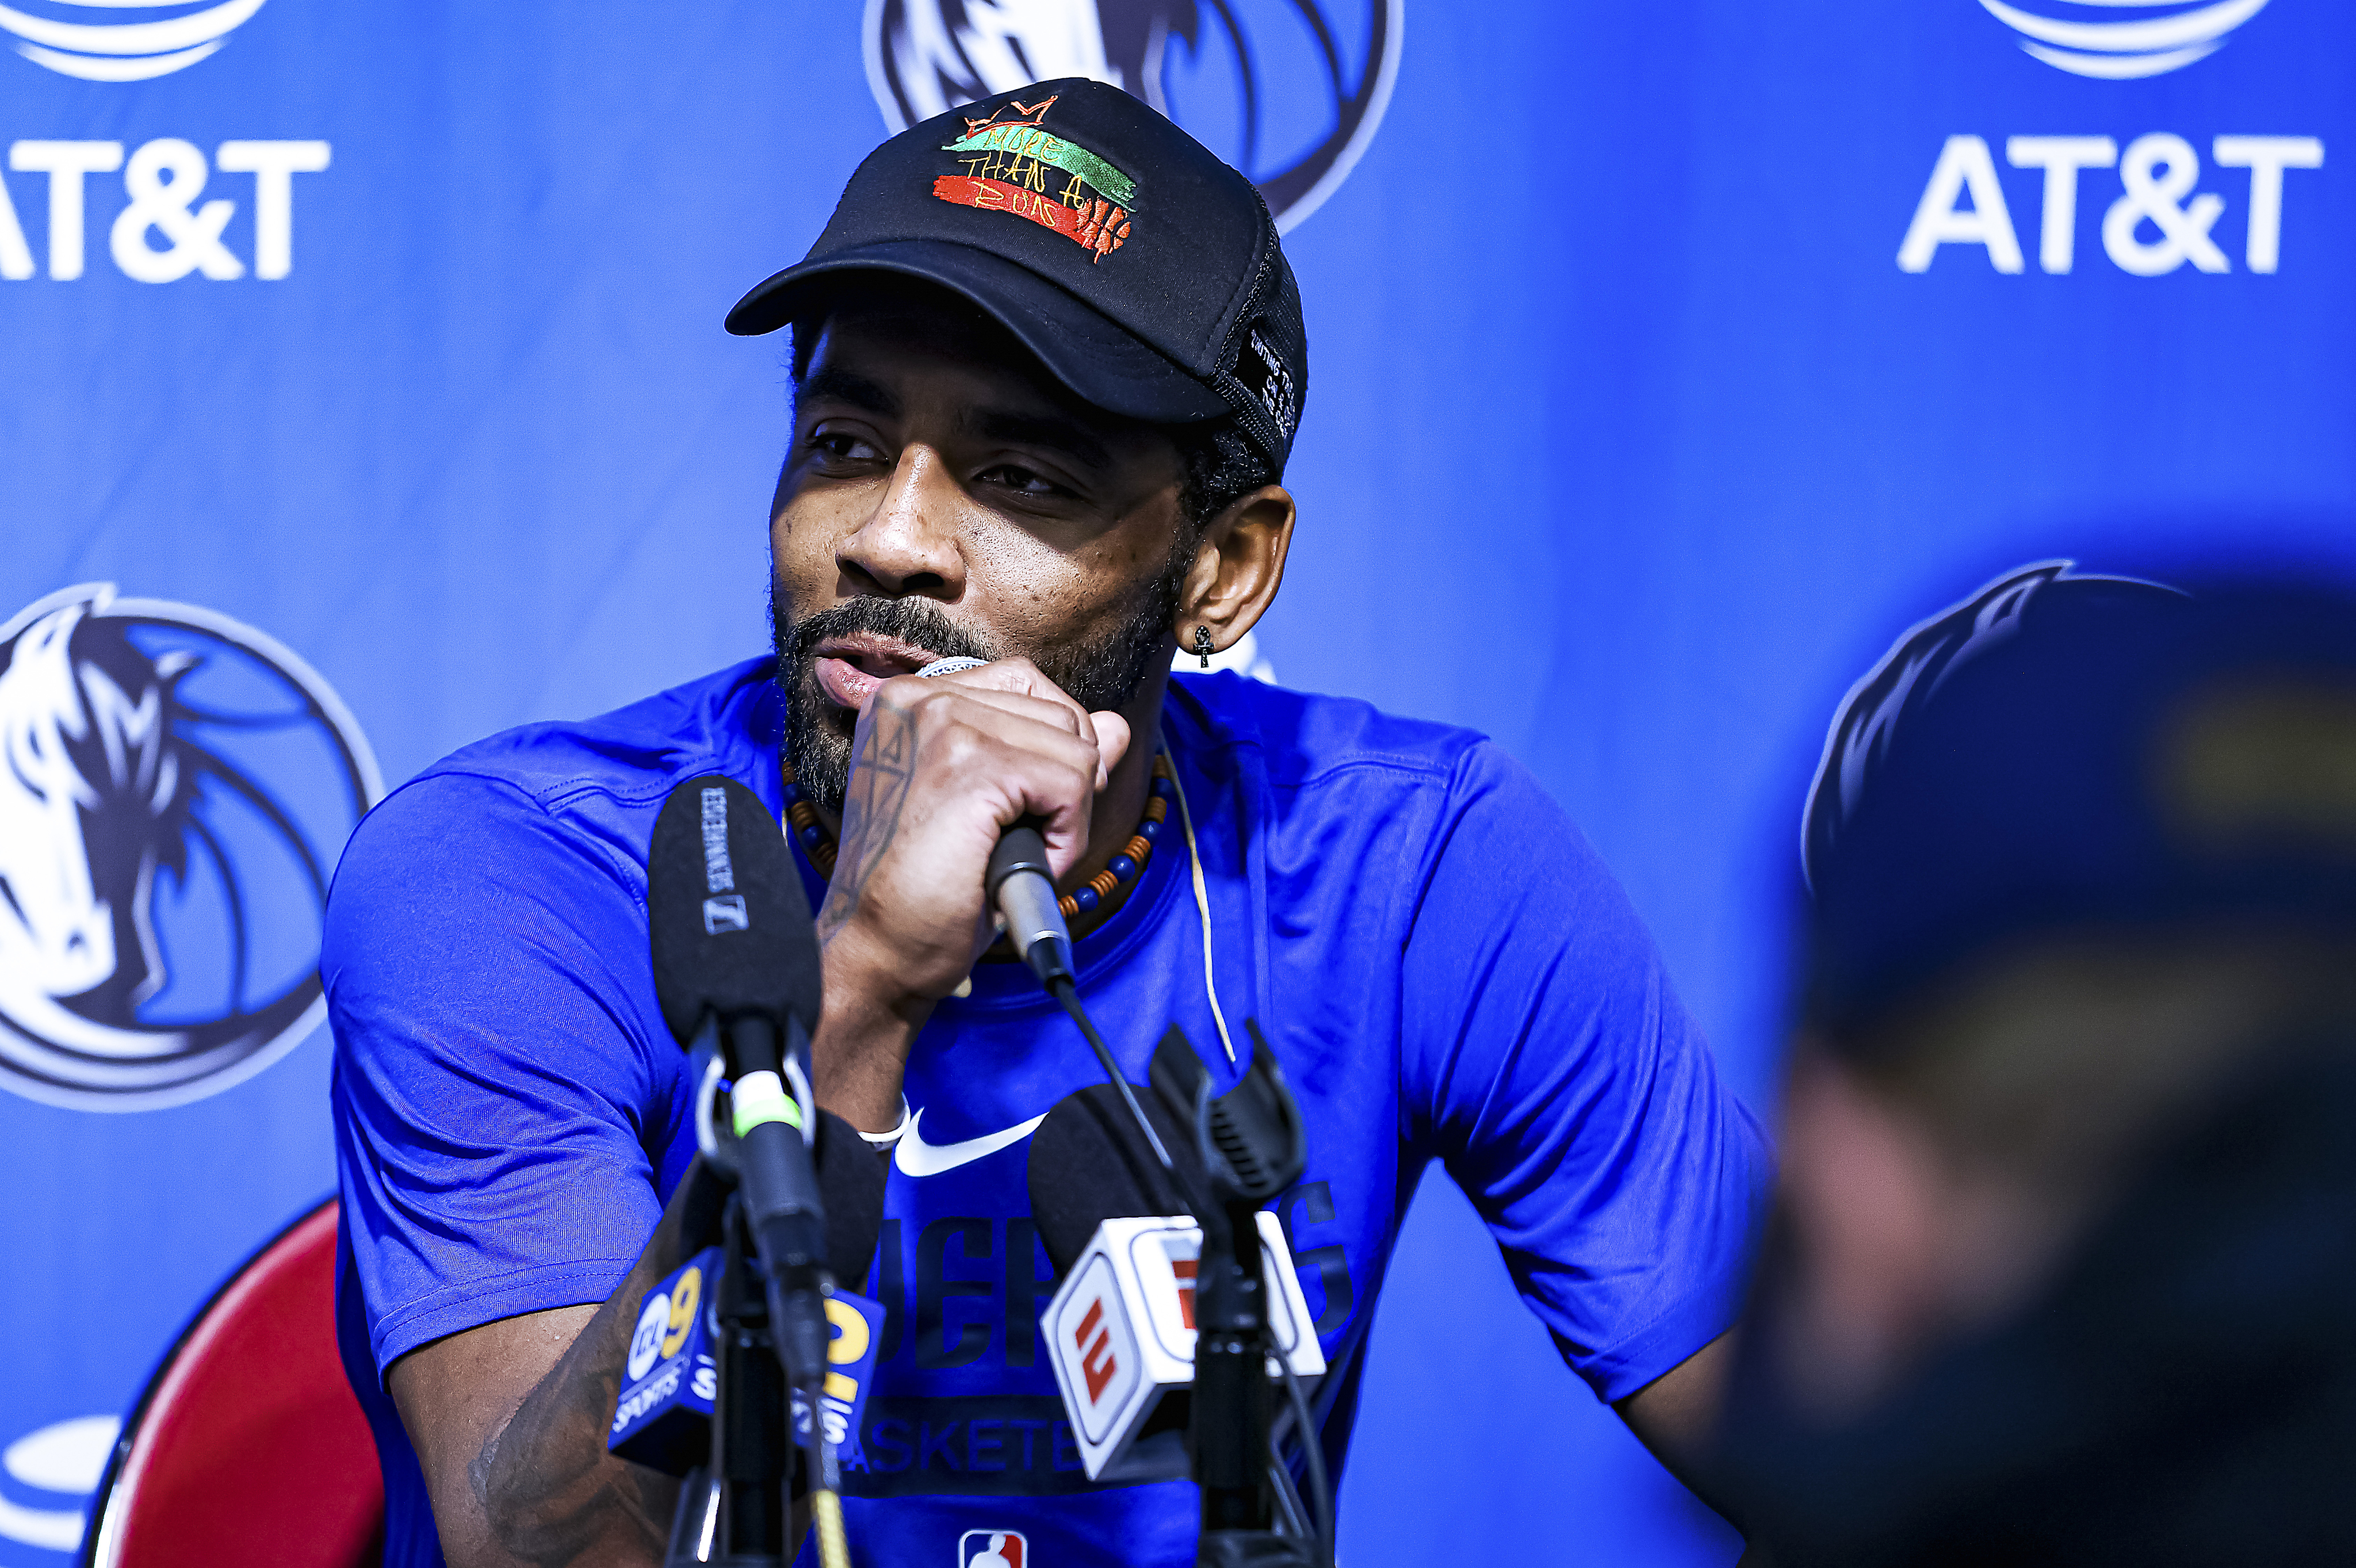 Kyrie Irving traded to Dallas Mavericks after antisemitism